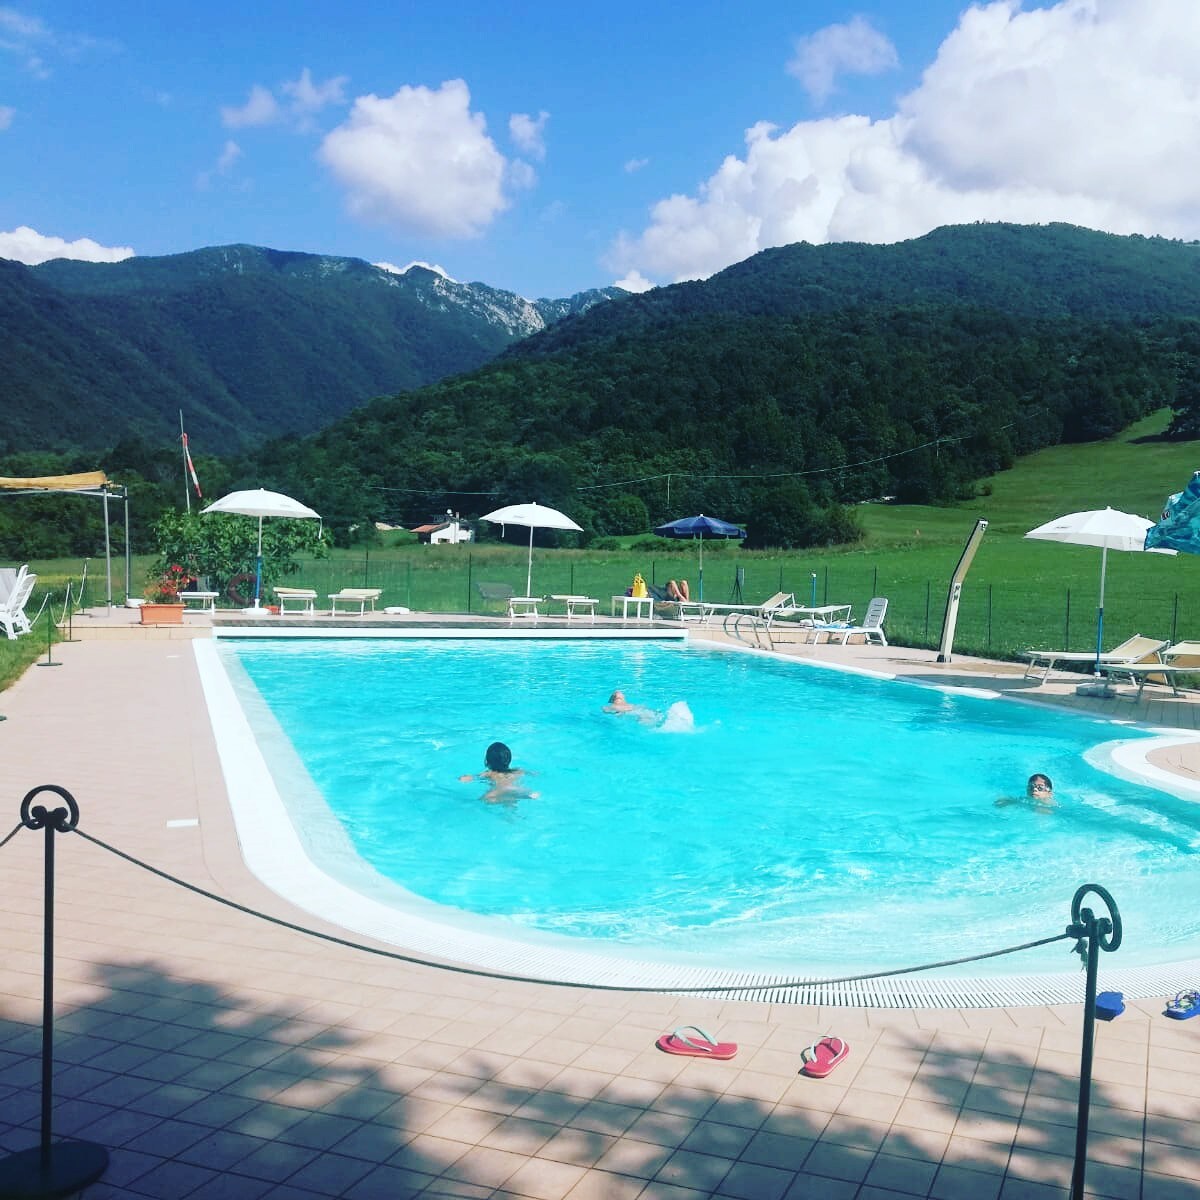 Hotel Colomber in the hills距离Vittoriale 5公里